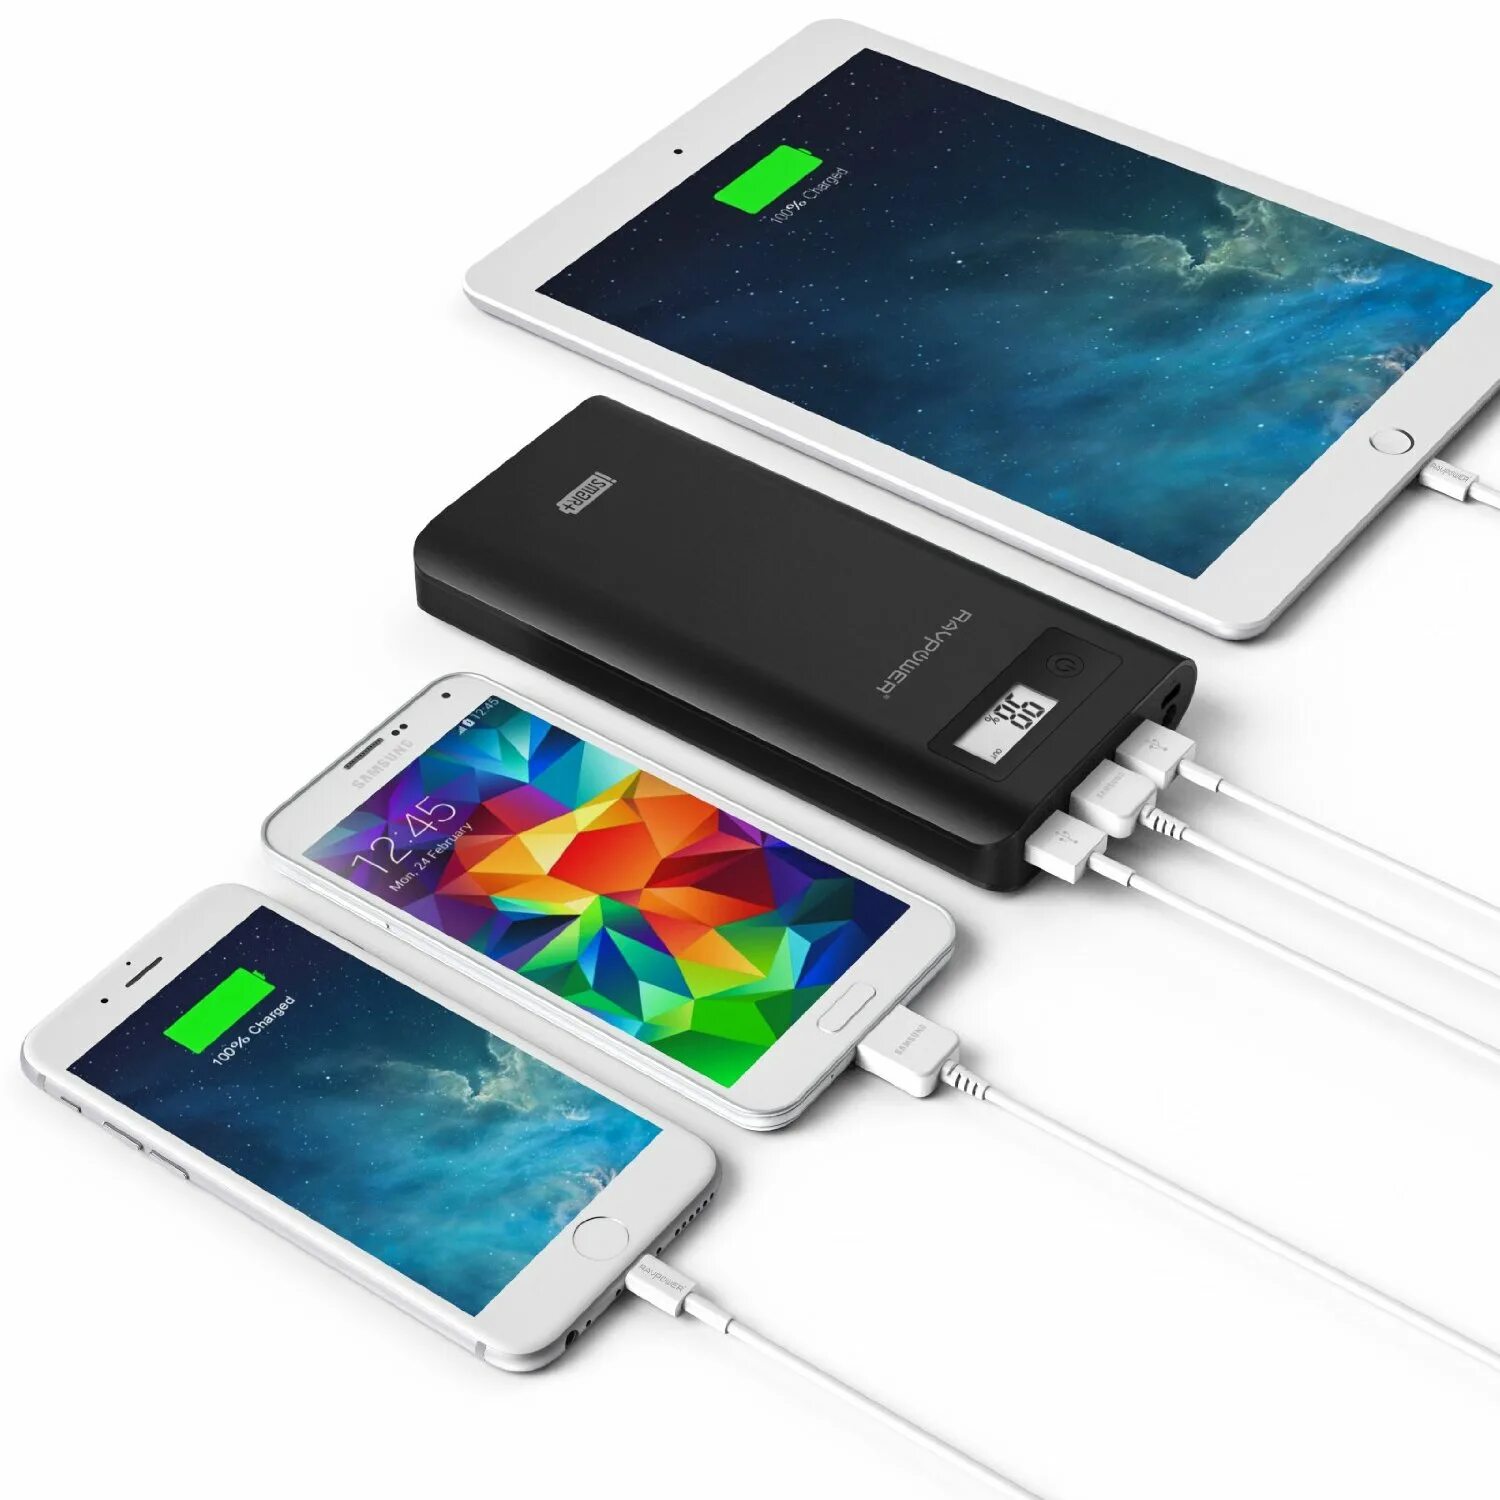 Satechi 100w. Cell Phone Charger. Планшет charge. Tablet Charging. Как зарядить айпад